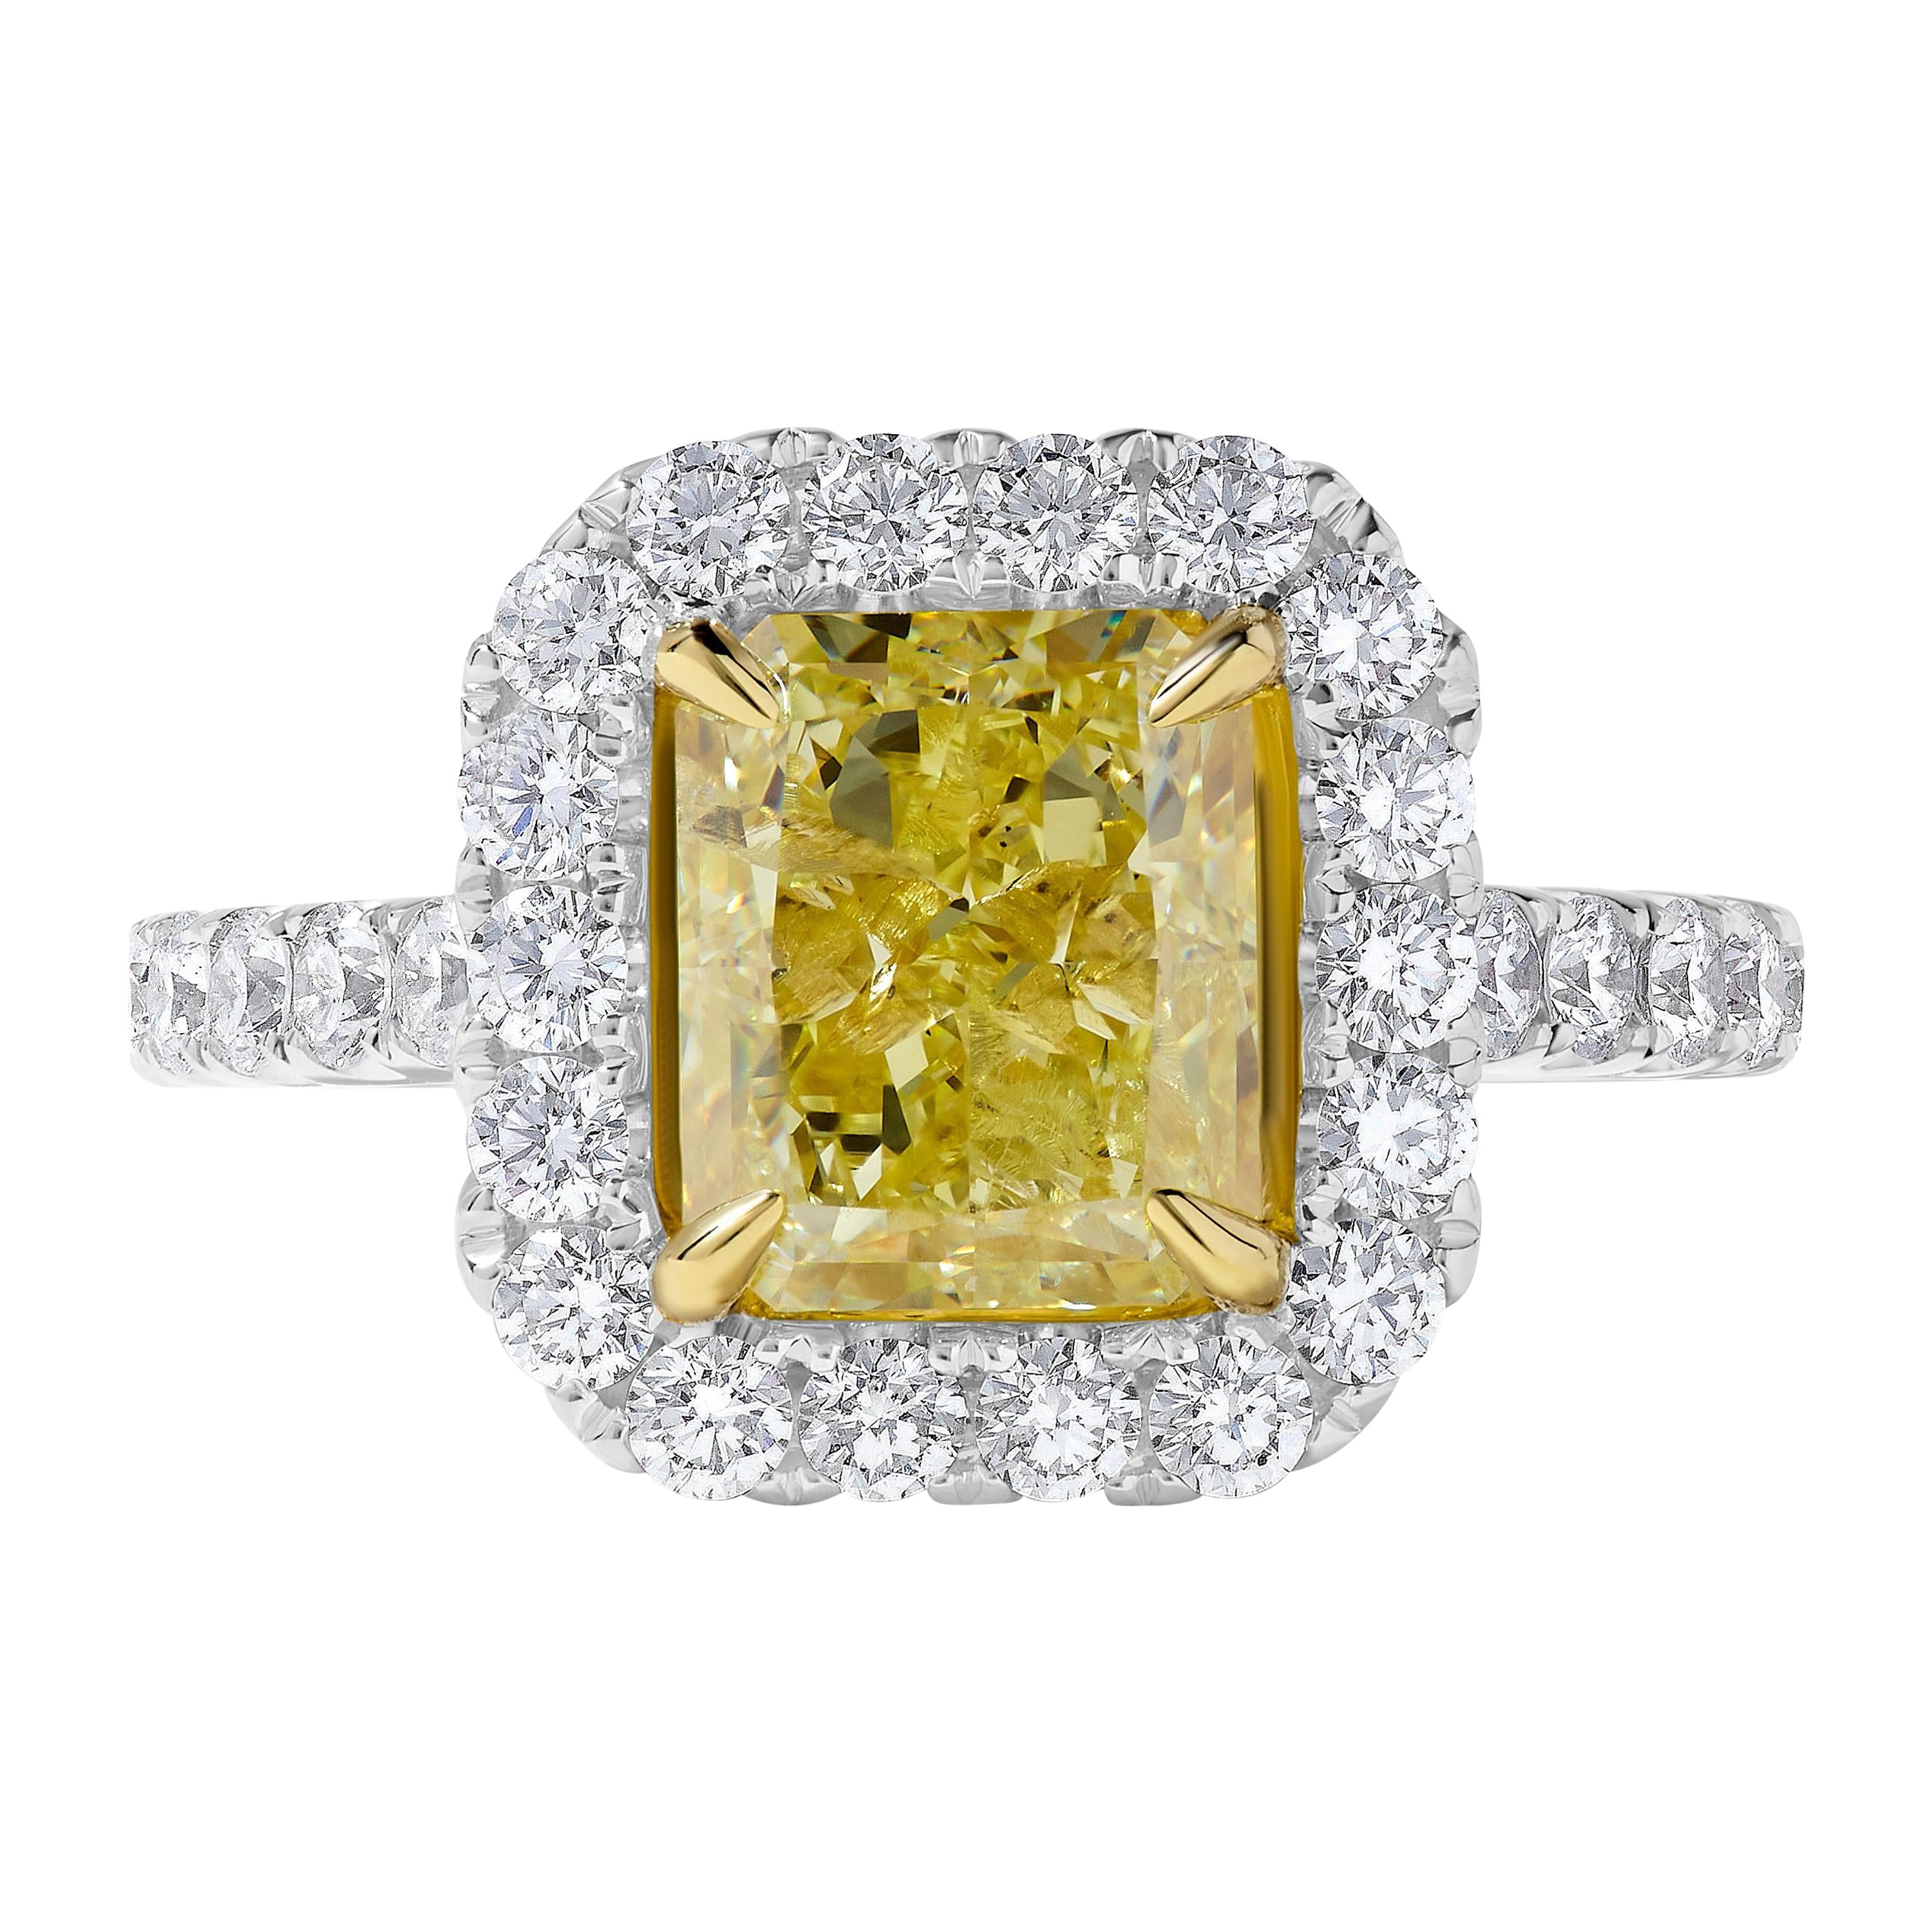 GIA Certified Natural Yellow Radiant Diamond 4.03 Carat TW Gold Cocktail Ring